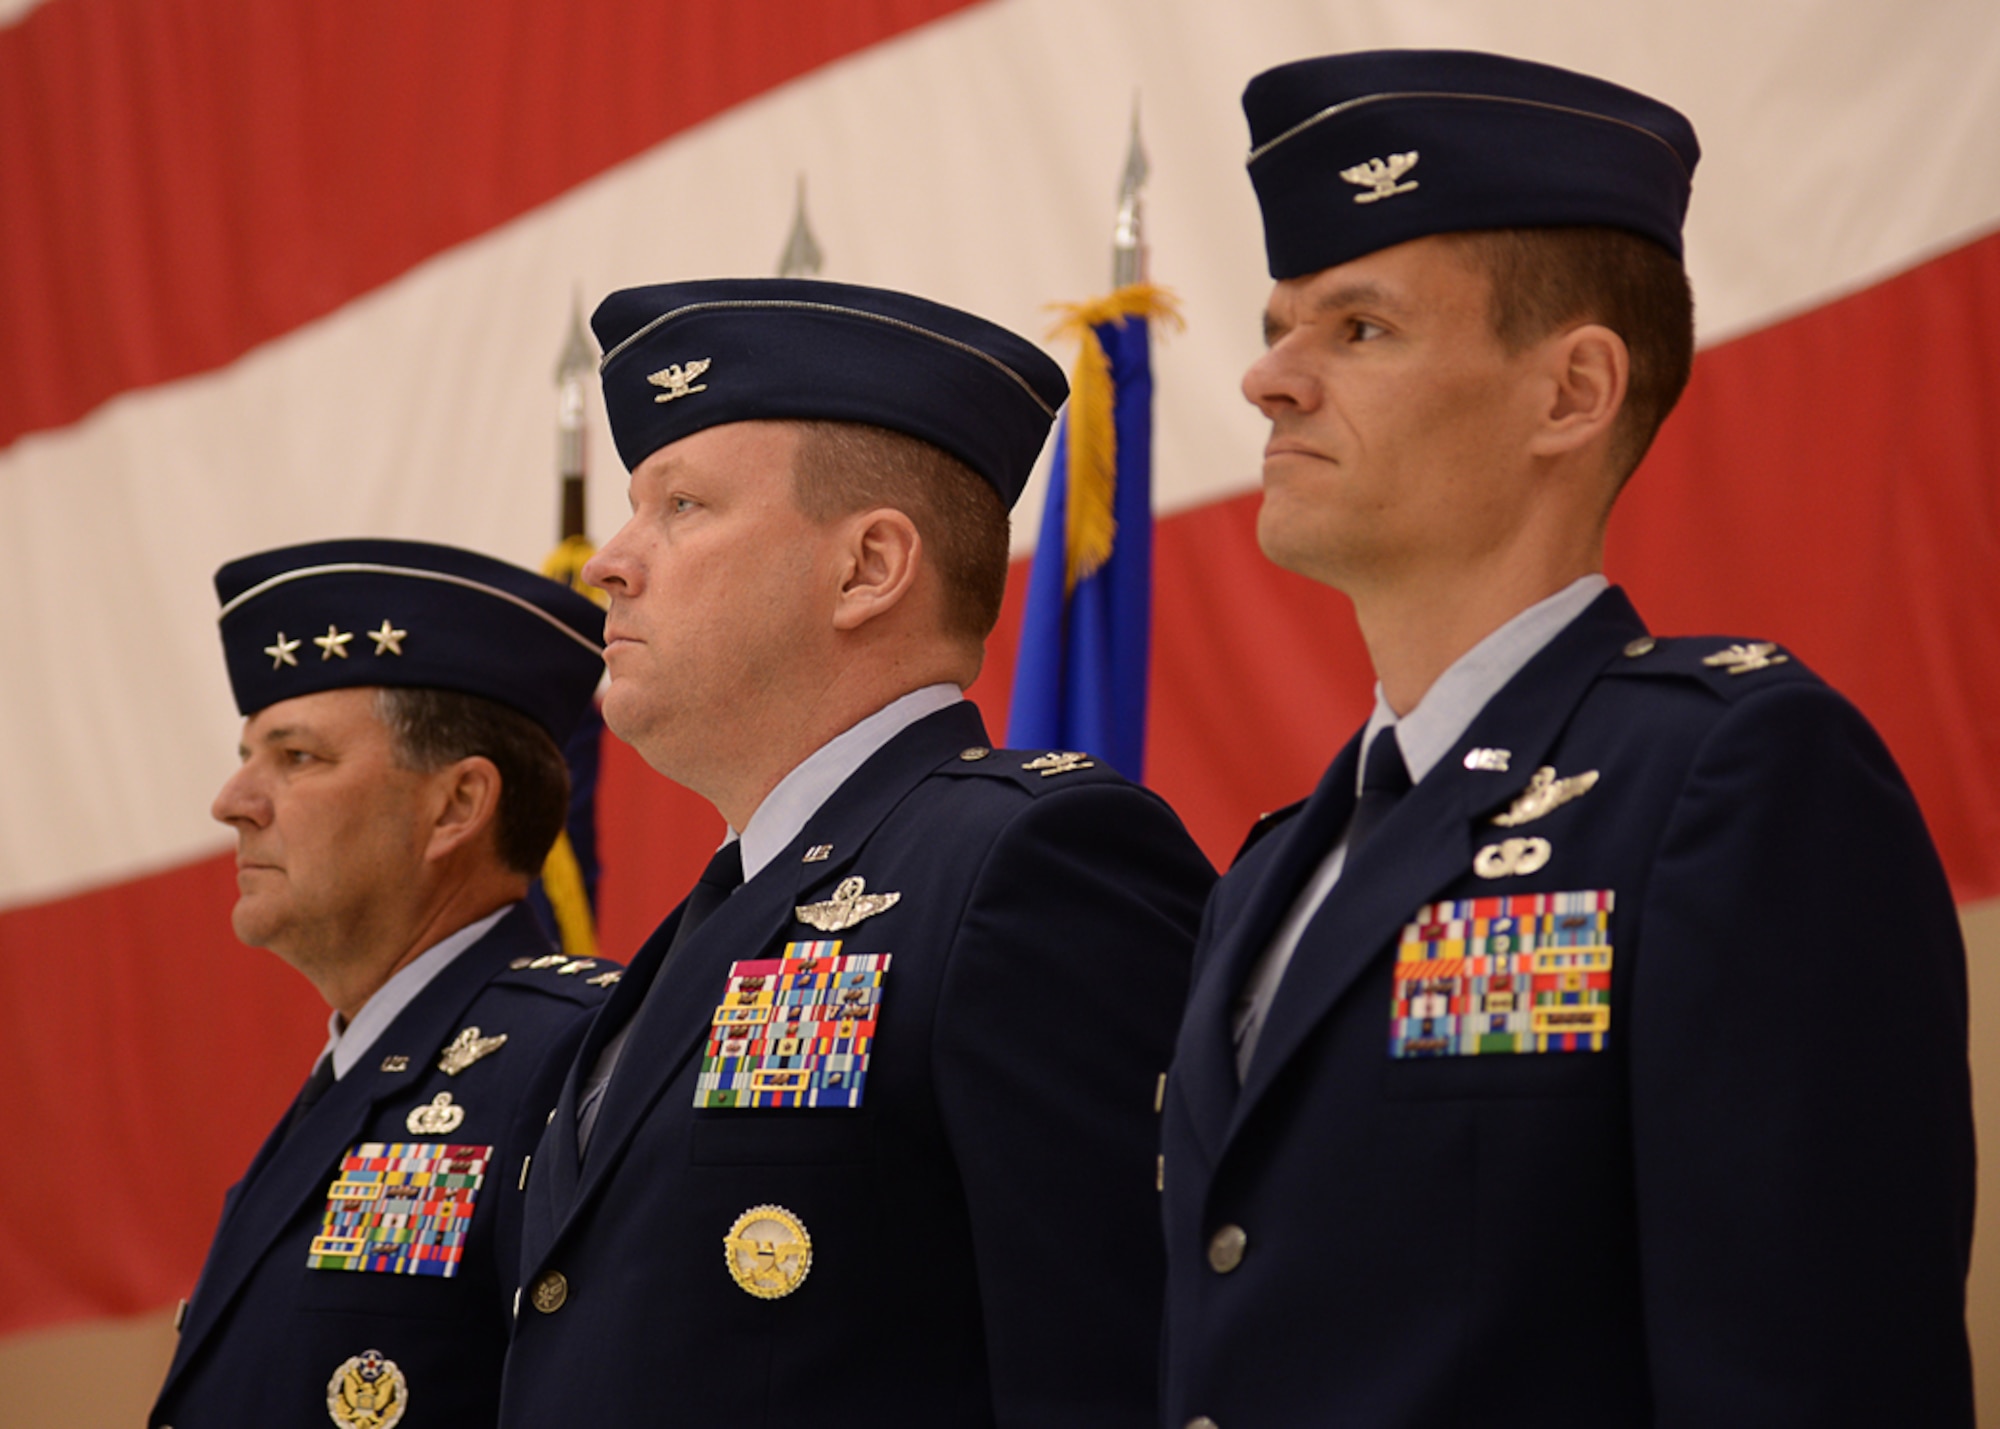 U.S. Air Force Lt. Gen. Bradley Heithold, Commander Air Force Special Operations Command, Col. Tony Bauernfeind, outgoing 27th Special Operations Wing commander, and Col. Benjamin Maitre, incoming 27th SOW commander, stand at attention before the National Anthem singing during the 27th SOW change of command ceremony, Feb. 17, 2015 at Cannon Air Force Base, N.M.  The change of command represents the closure of one chapter and the beginning of another for Air Commandos of the 27th SOW.  (U.S. Air Force photo/Airman 1st Class Chip Slack)